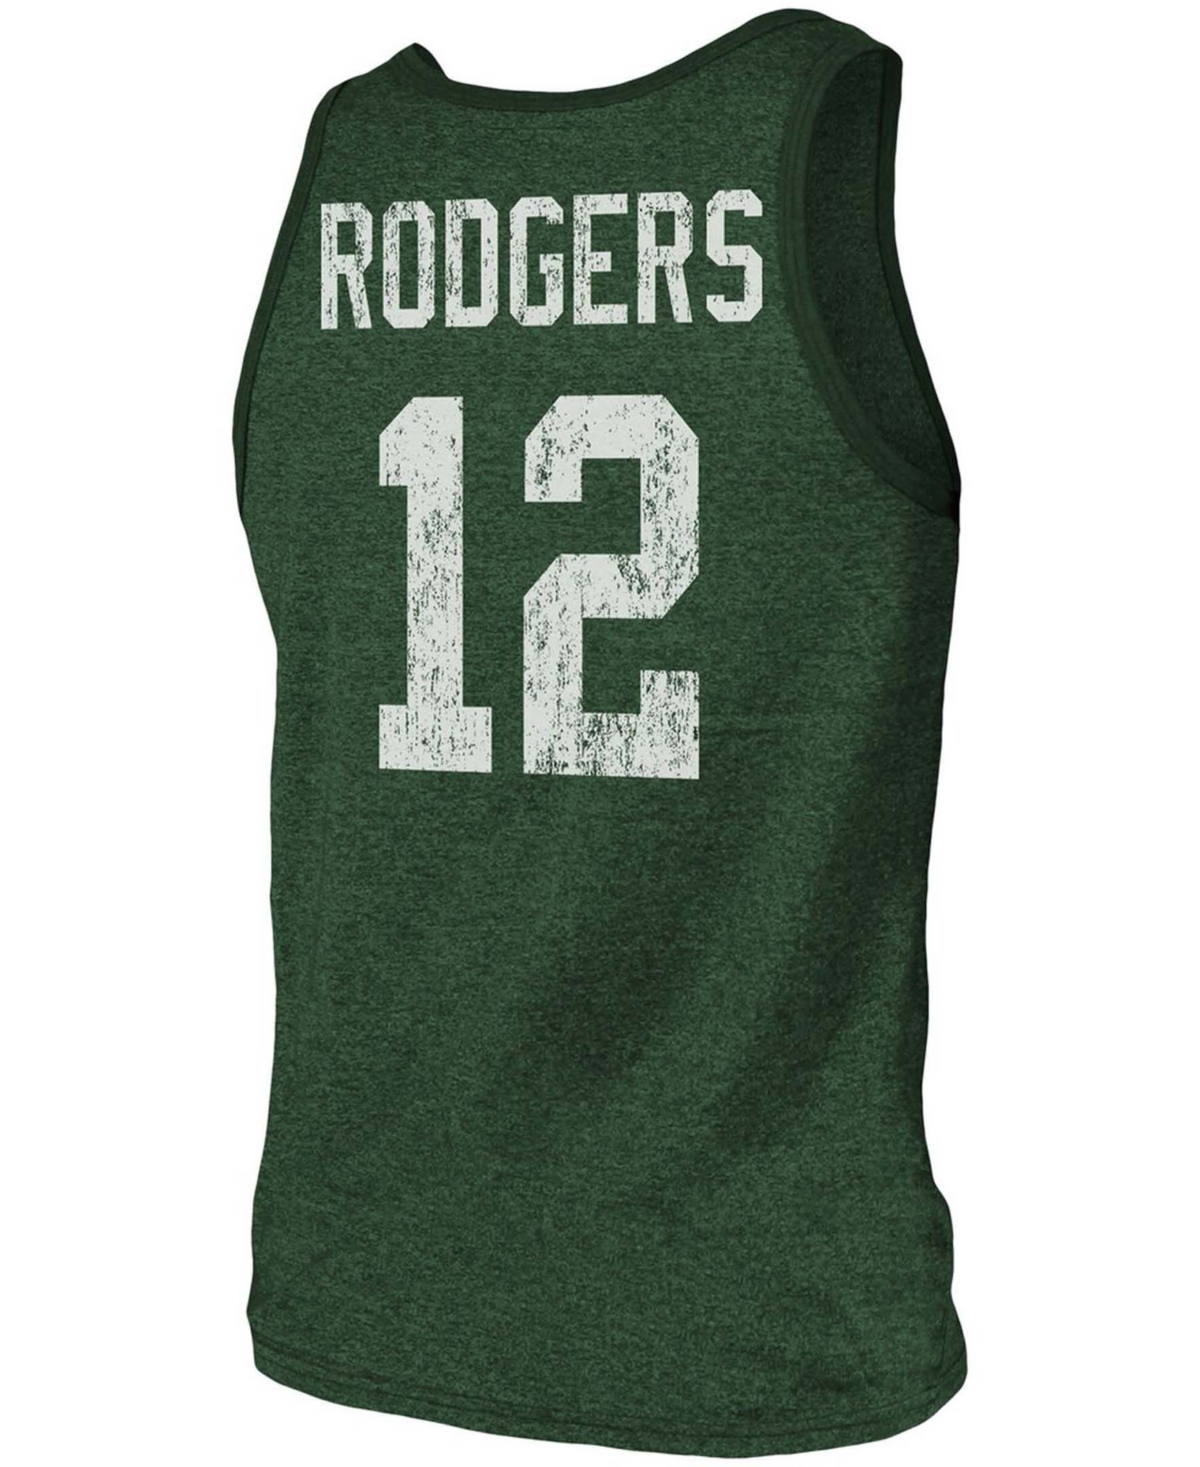 Shop Fanatics Men's Aaron Rodgers Green Green Bay Packers Name Number Tri-blend Tank Top